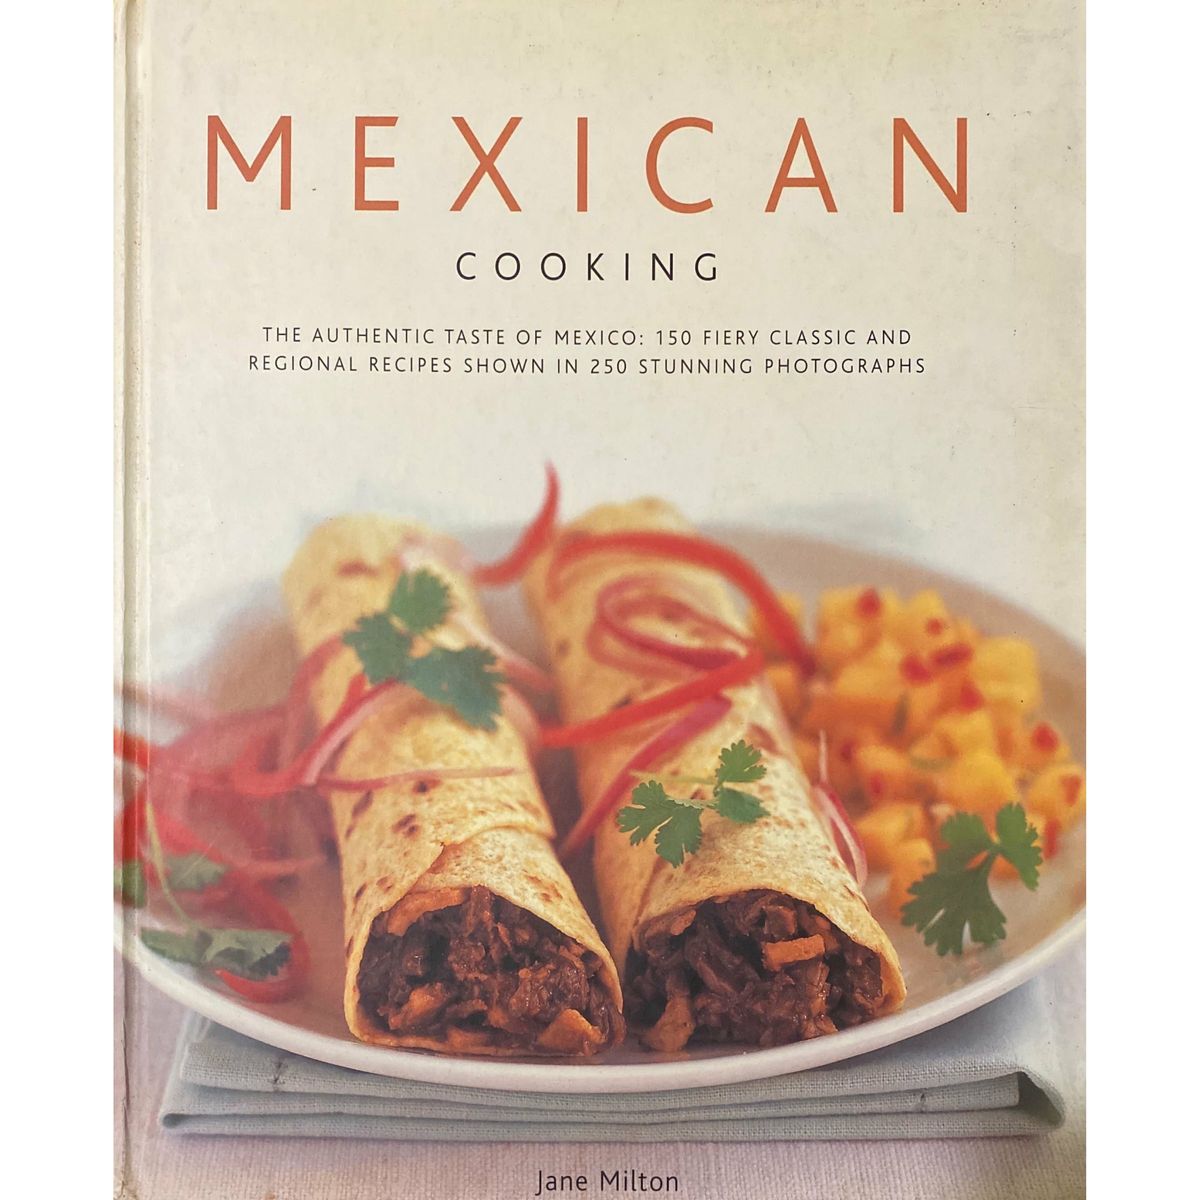 ISBN: 9780754818168 / 0754818160 - Mexican Cooking: The Authentic Taste of Mexico by Jane Milton [2008]